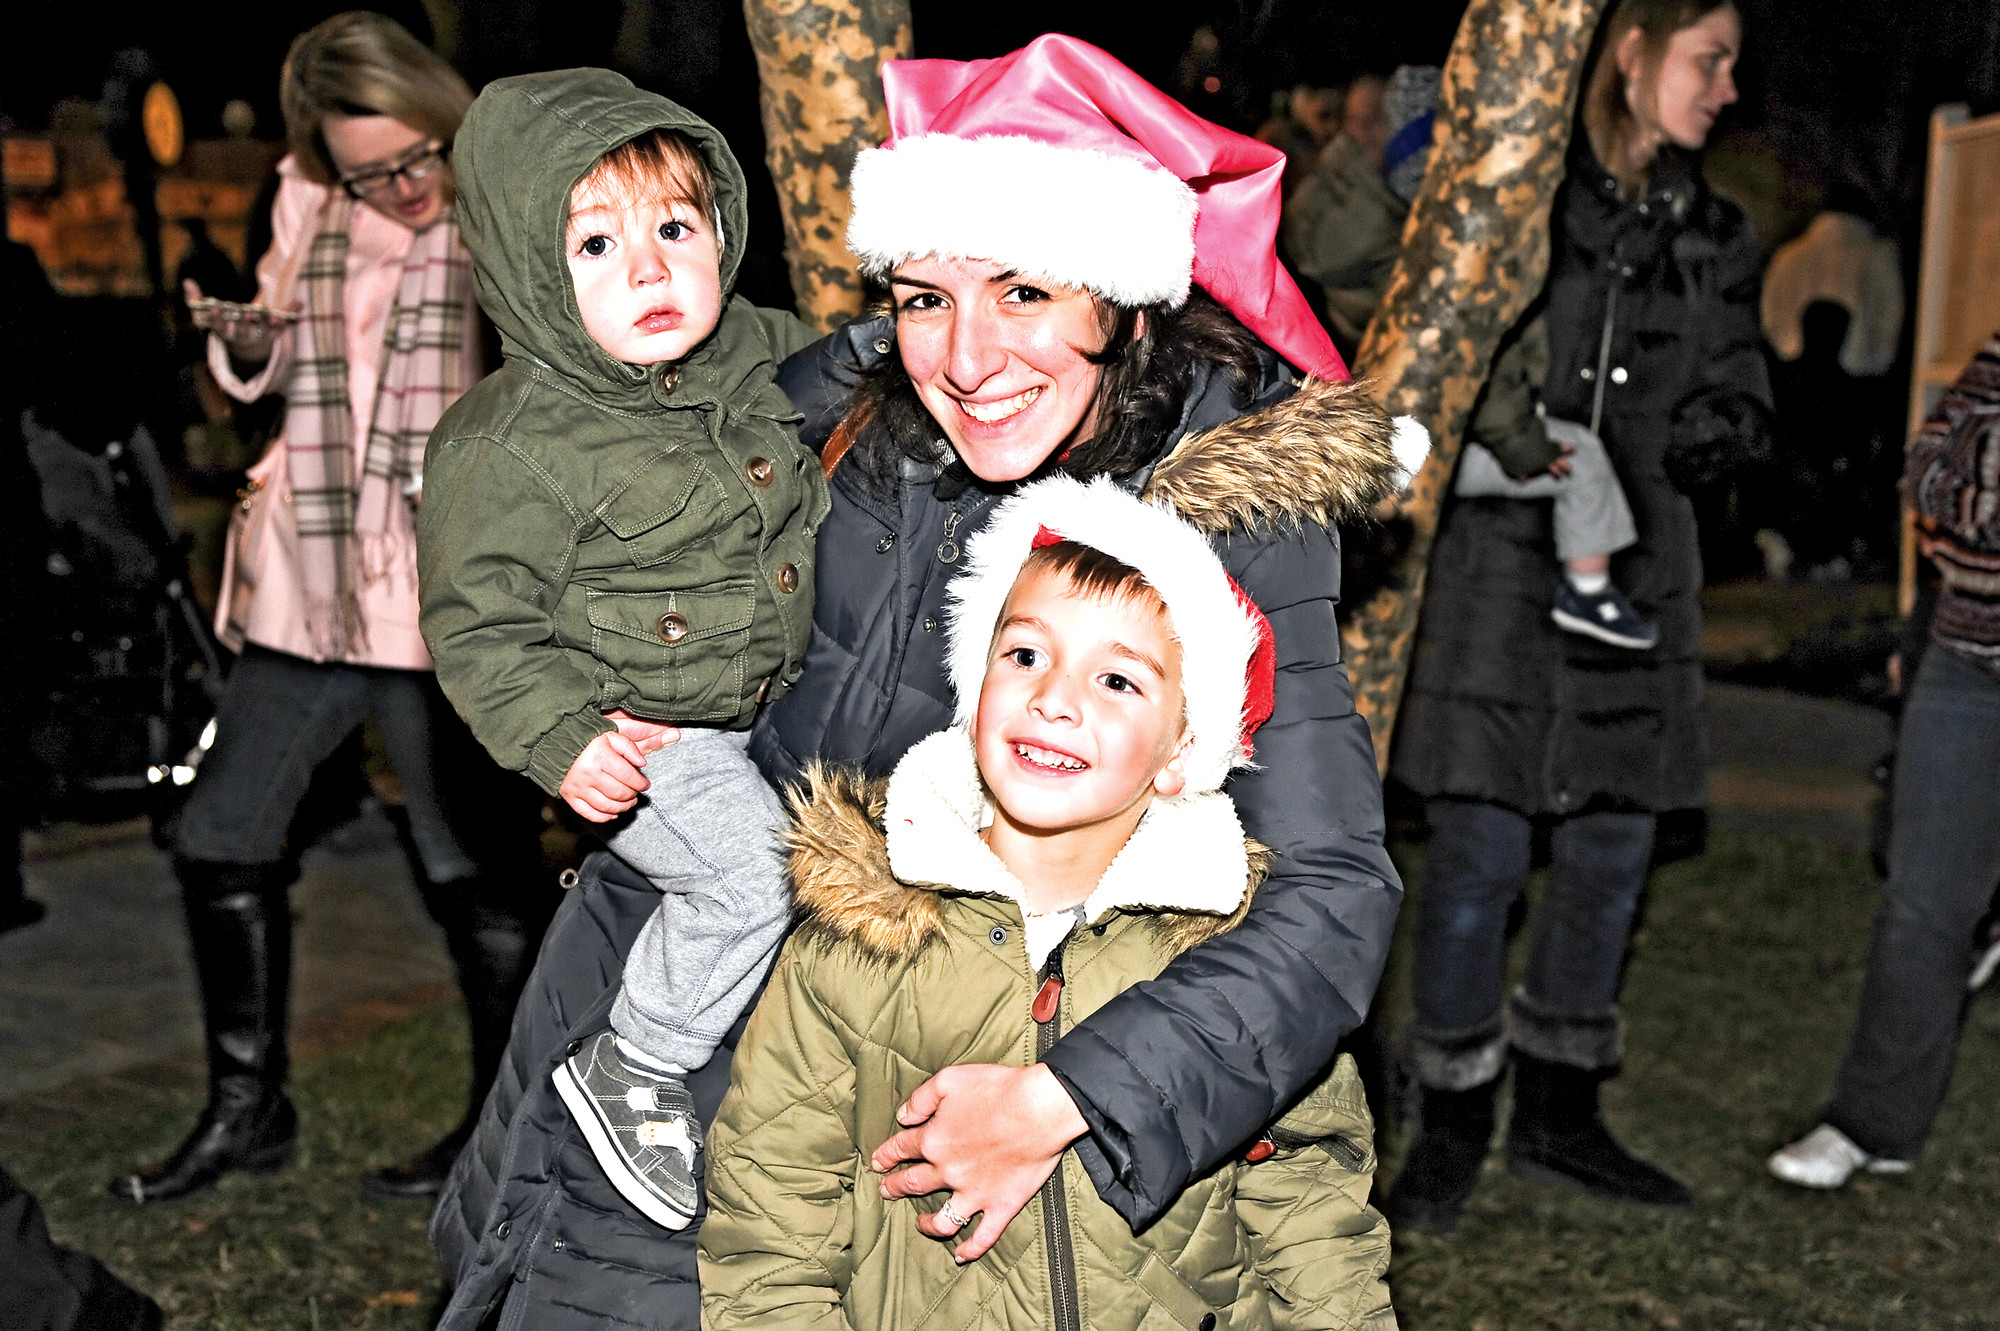 June Wildes, with children Brody, 1, and Brayden, 4, were feeling the holiday cheer.